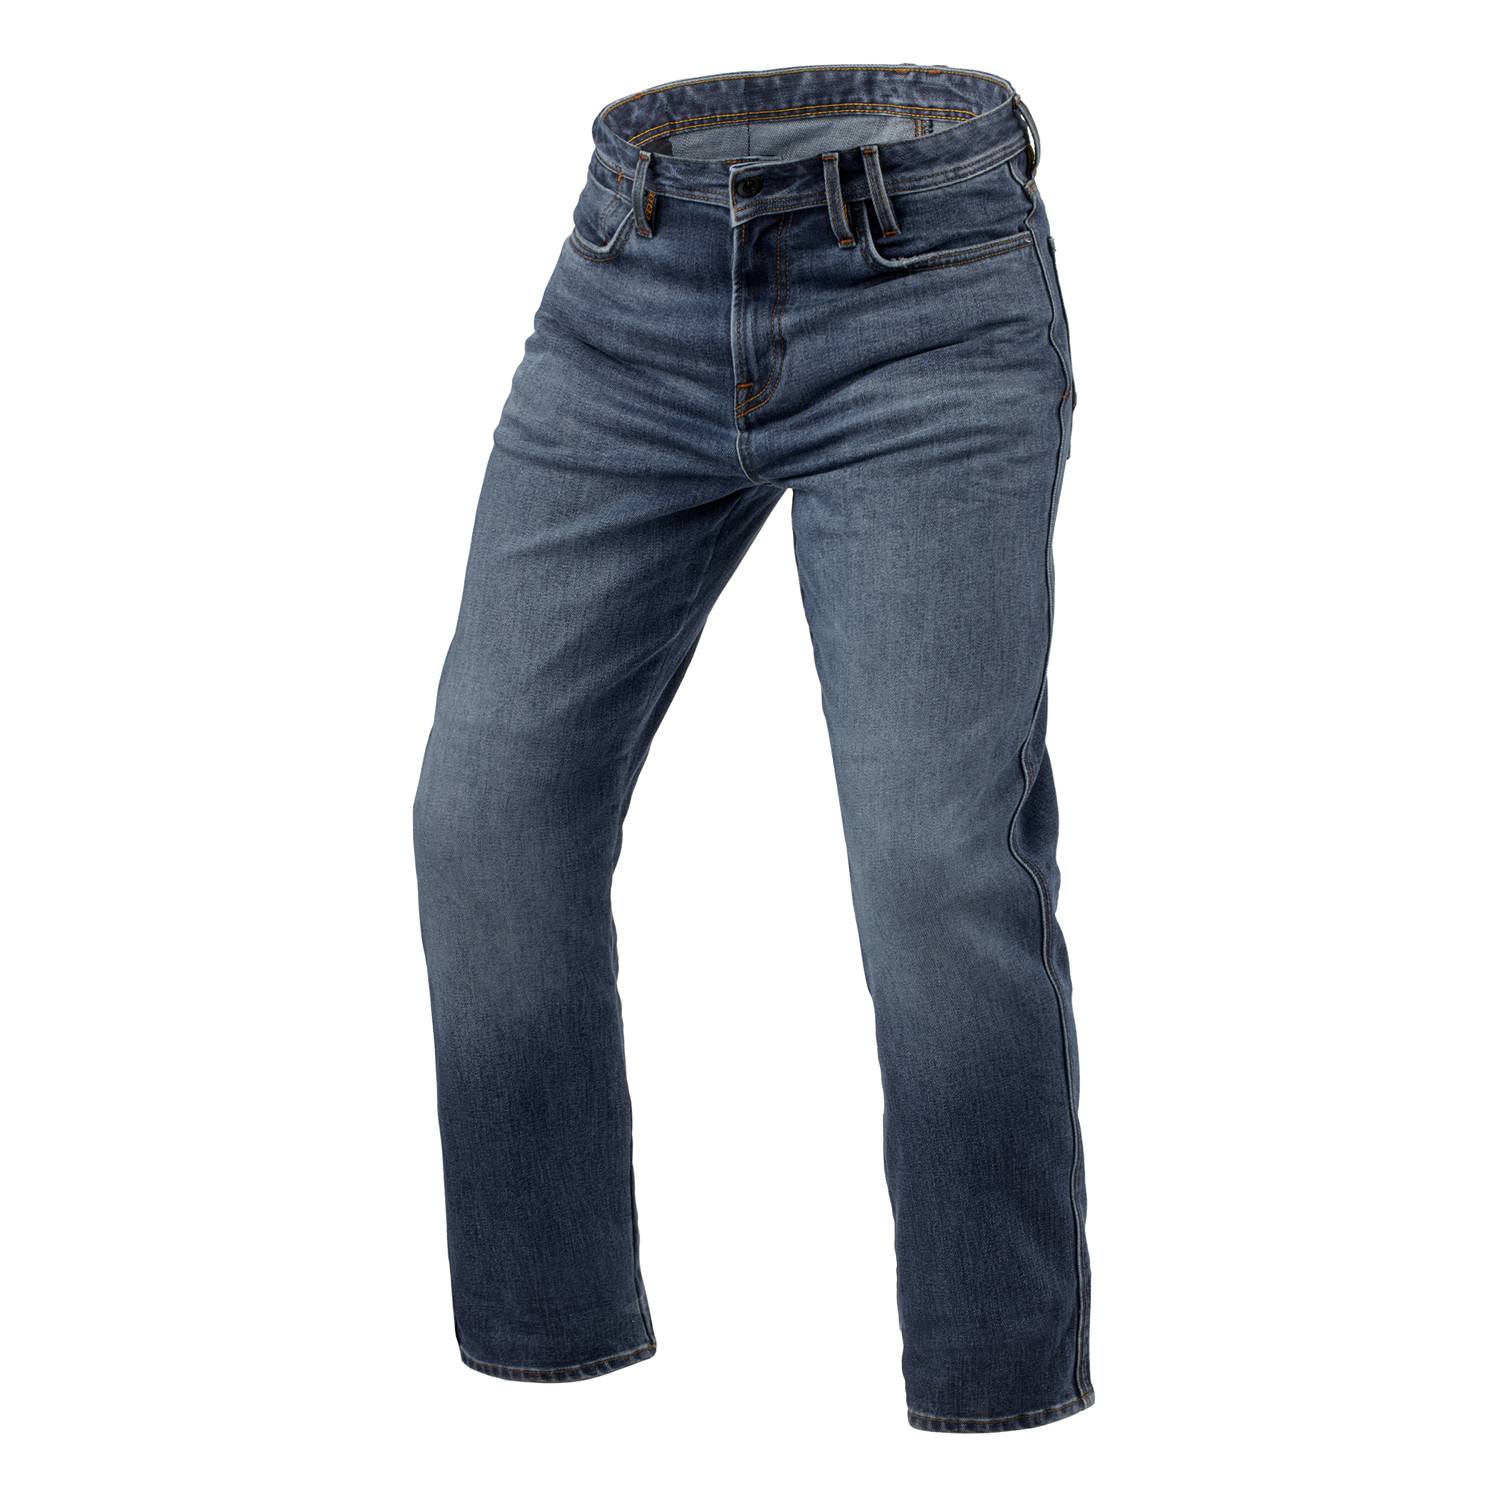 Image of REV'IT! Jeans Lombard 3 RF Medium Blue Stone L34 Motorcycle Jeans Taille L34/W30